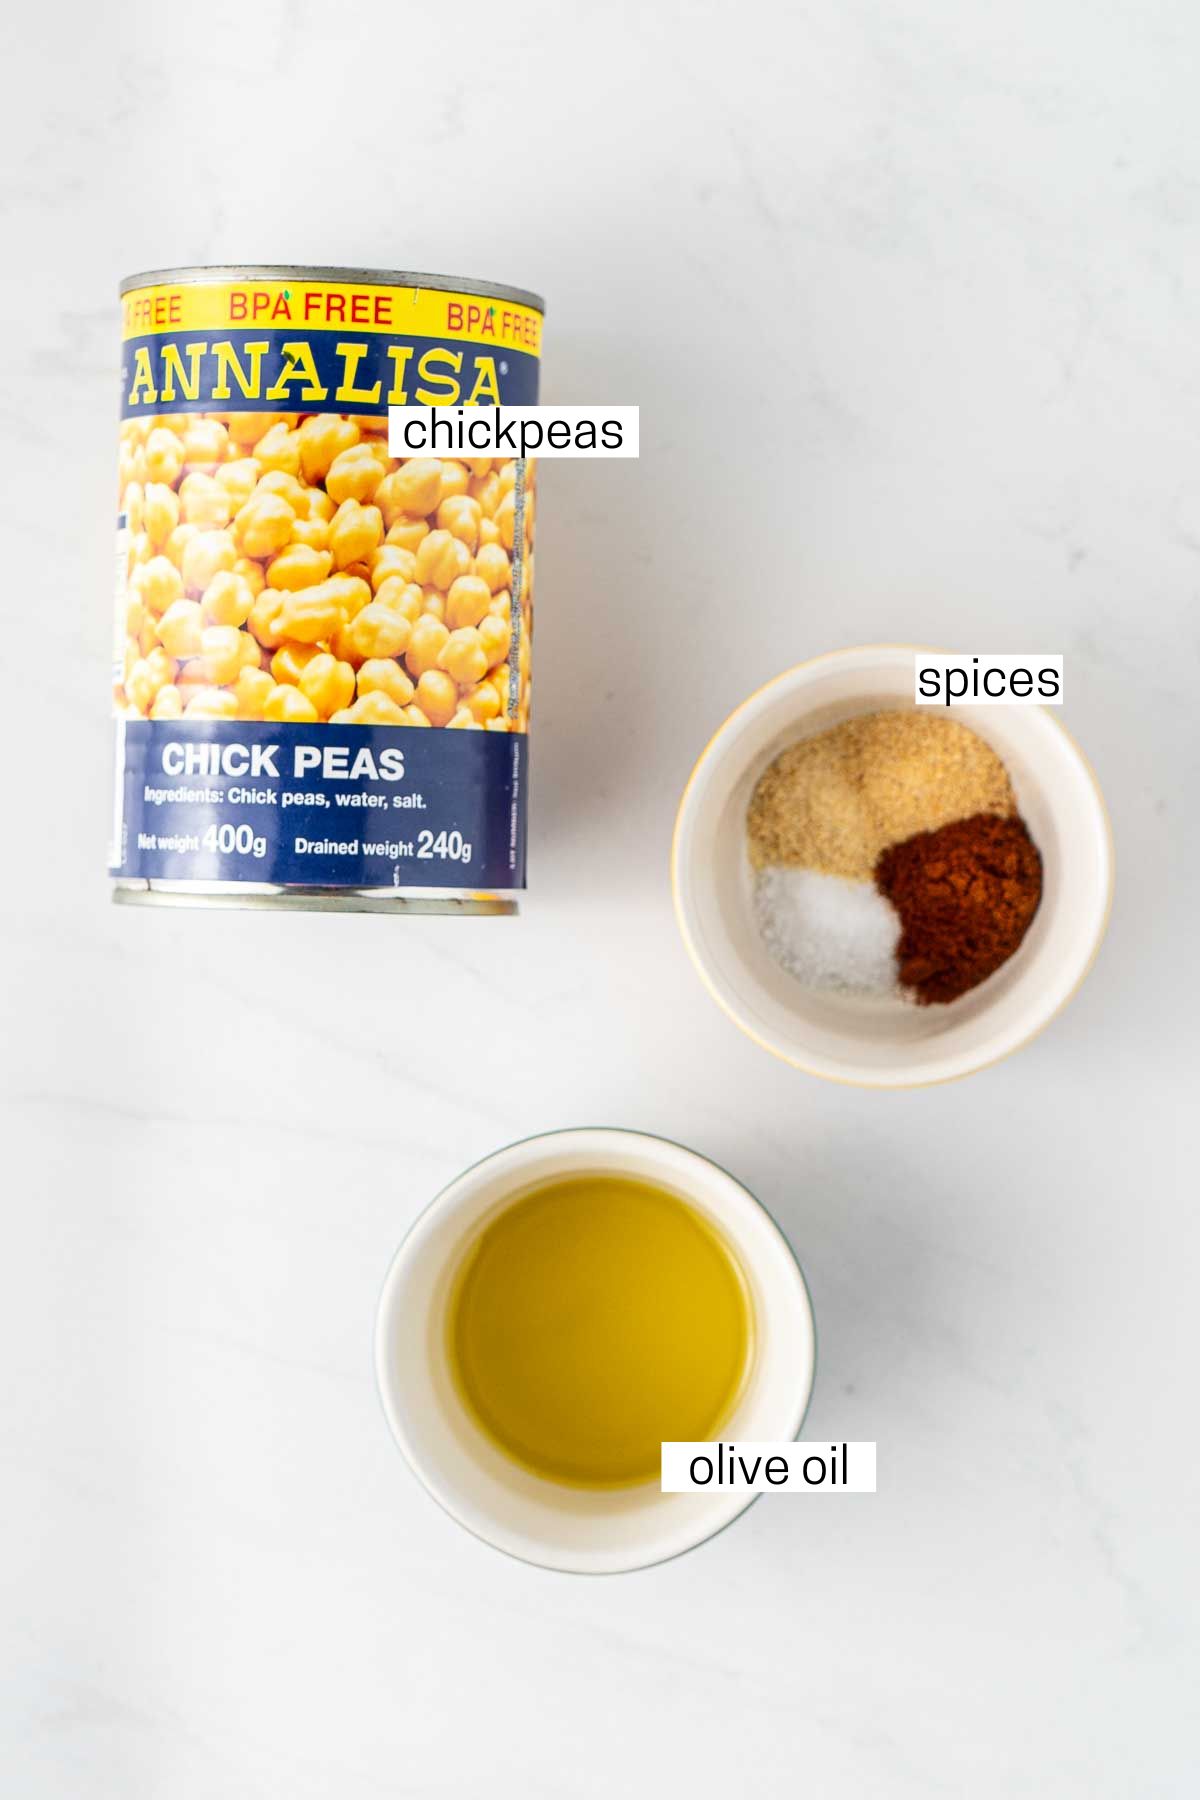 All ingredients needed for crispy air fryer chickpeas laid out in bowls.